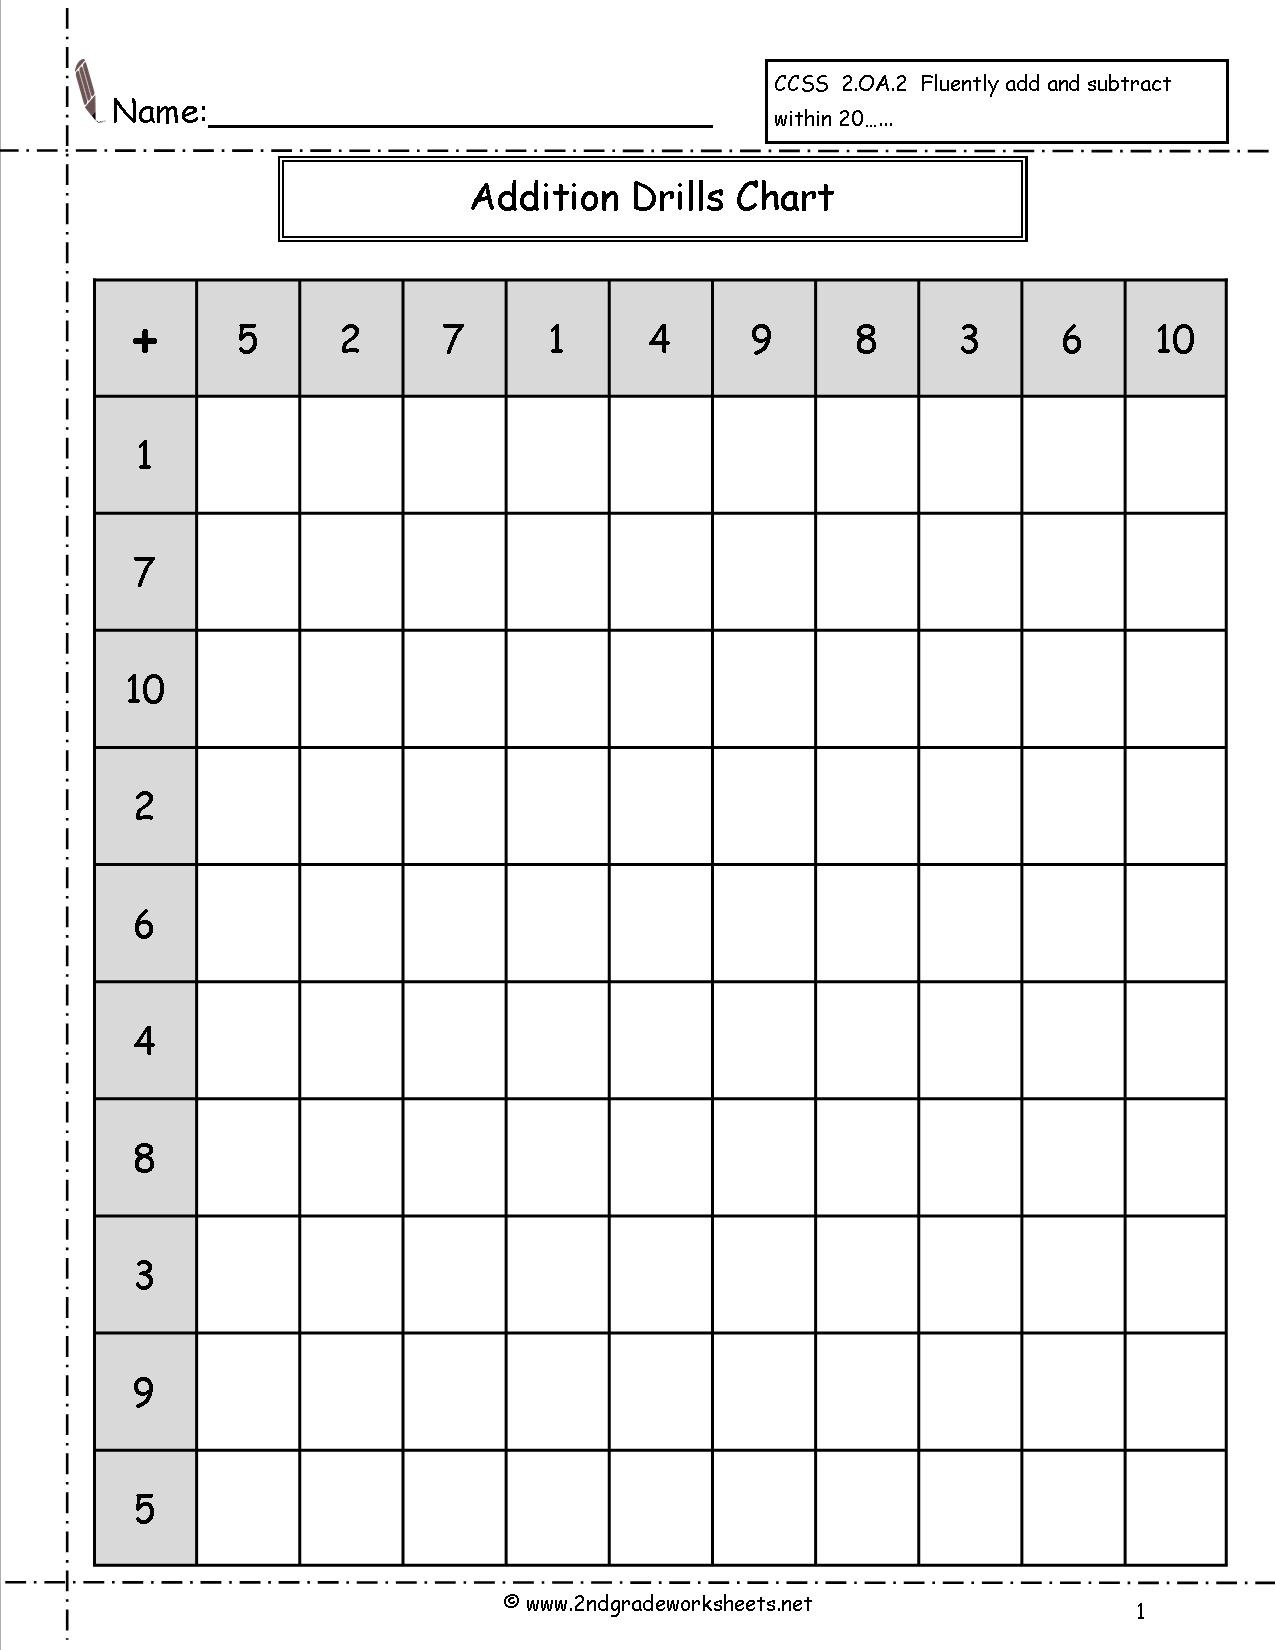 Free Printable Number Charts And 100Charts For Counting, Skip Free Printable Addition Chart